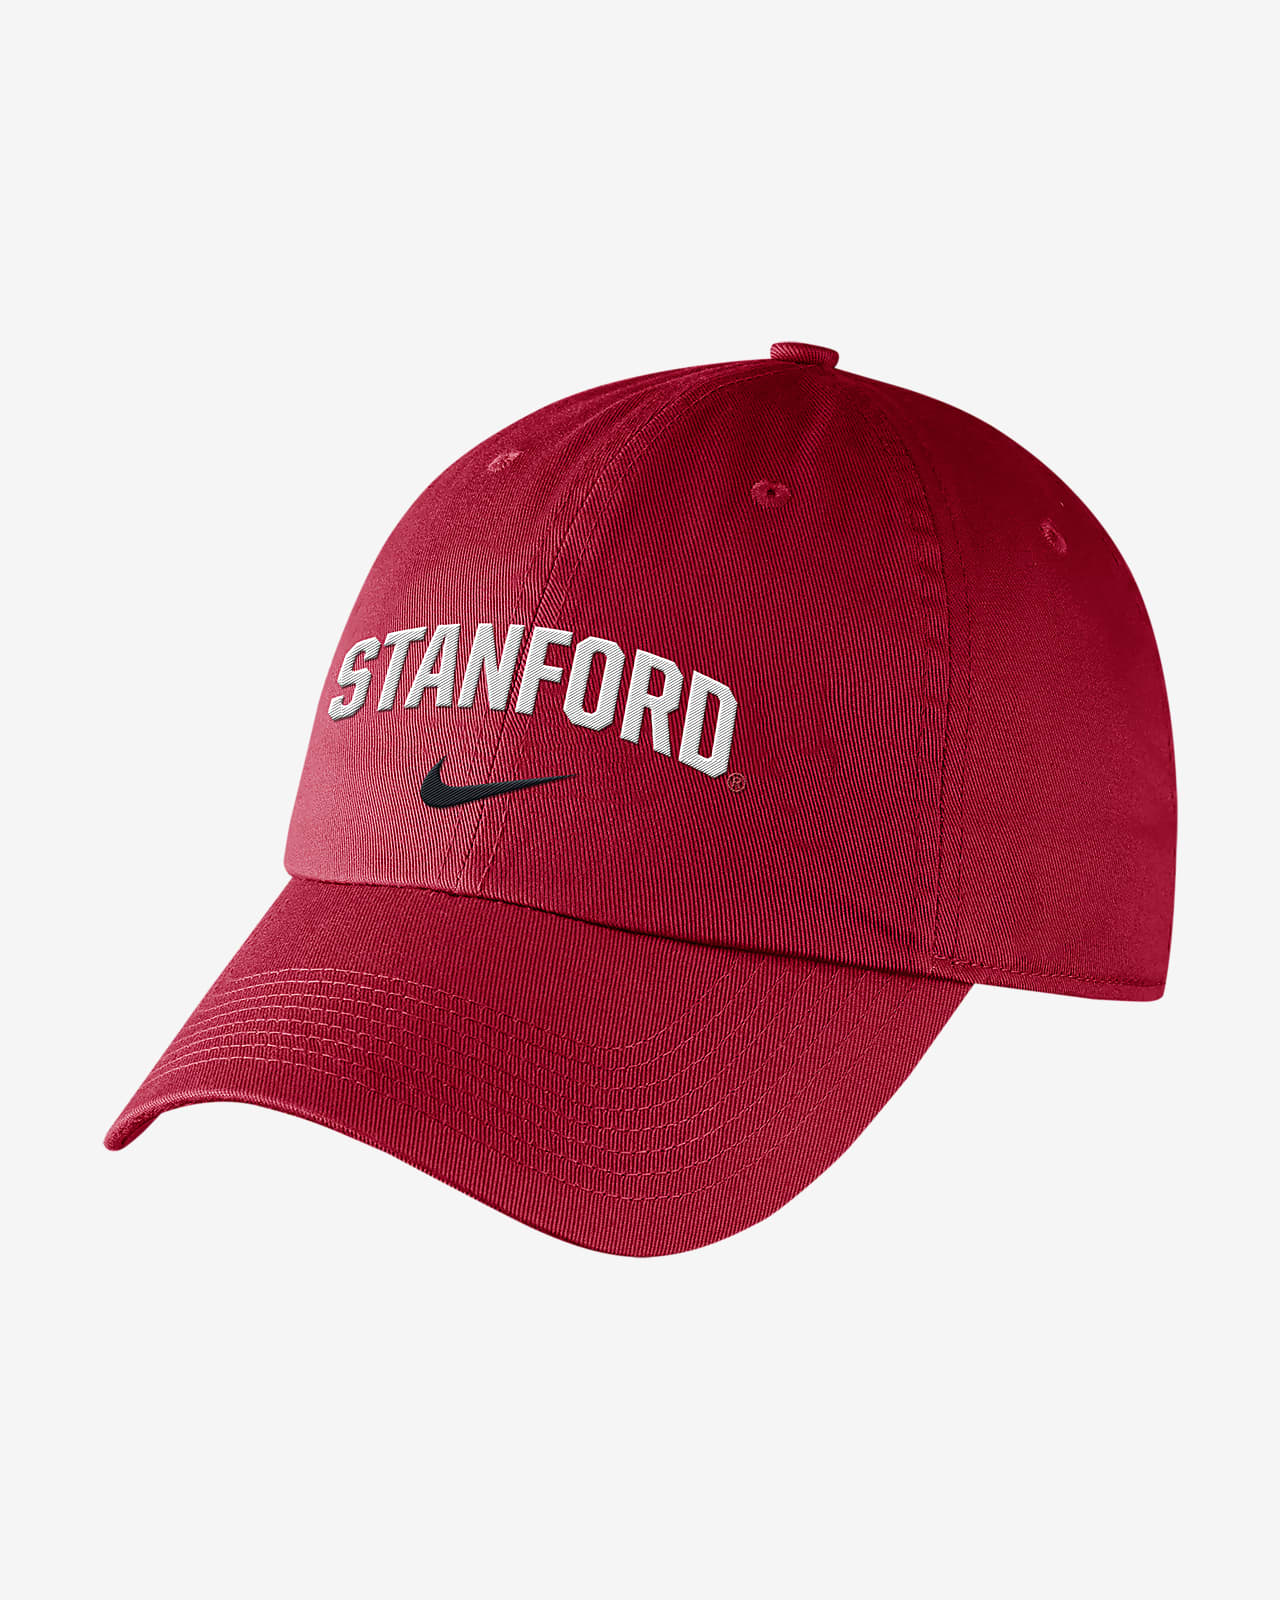 Nike College (Stanford) Hat